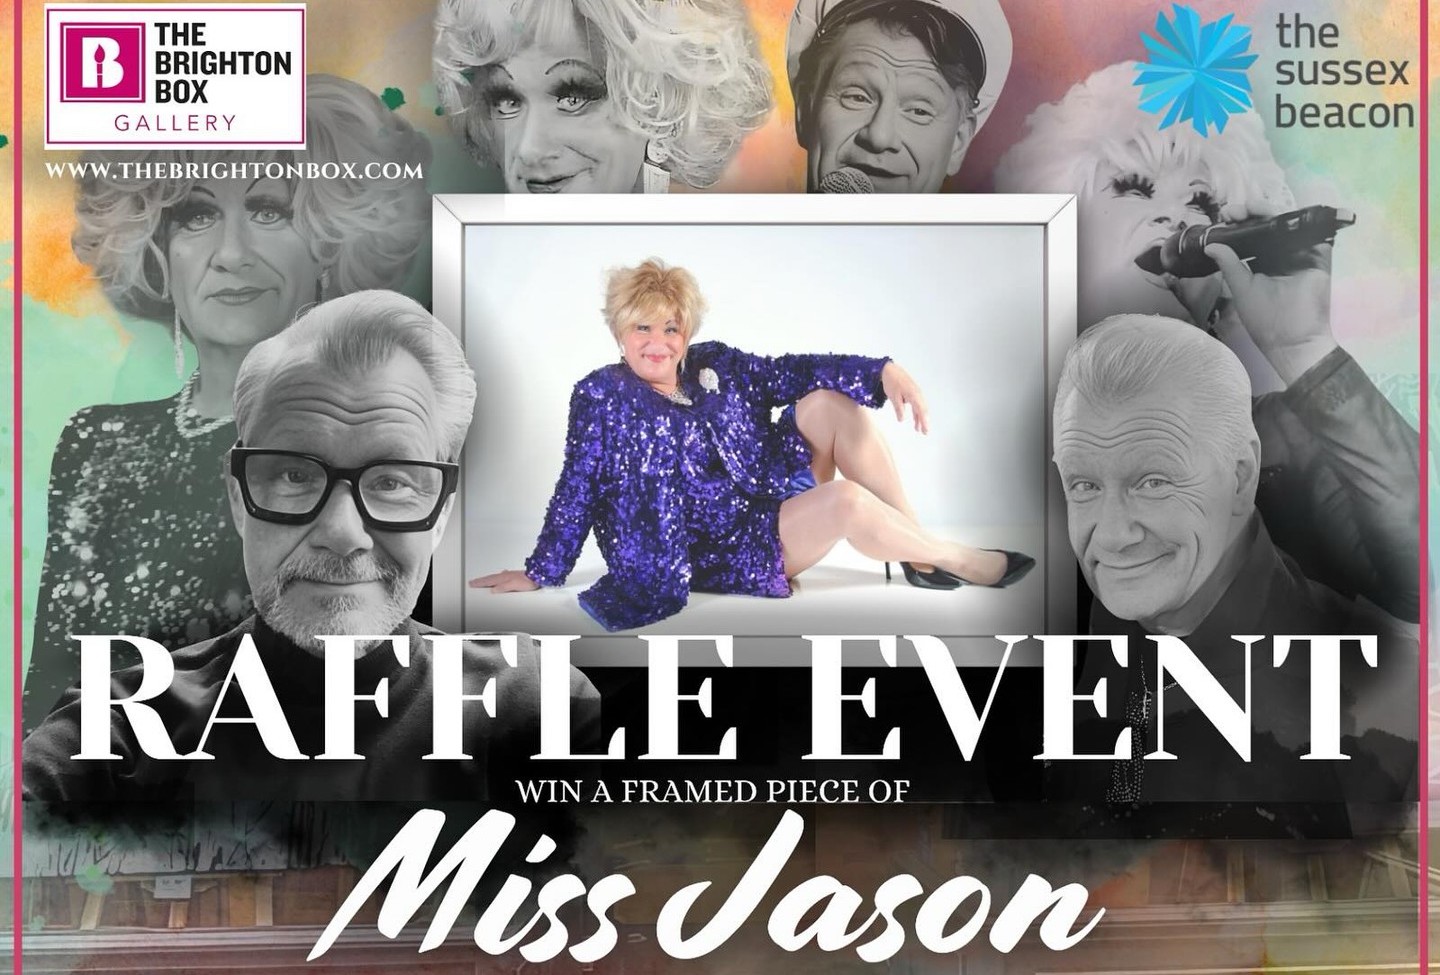 Brighton Box Gallery to raffle framed photo of legendary performer Miss Jason for the Sussex Beacon